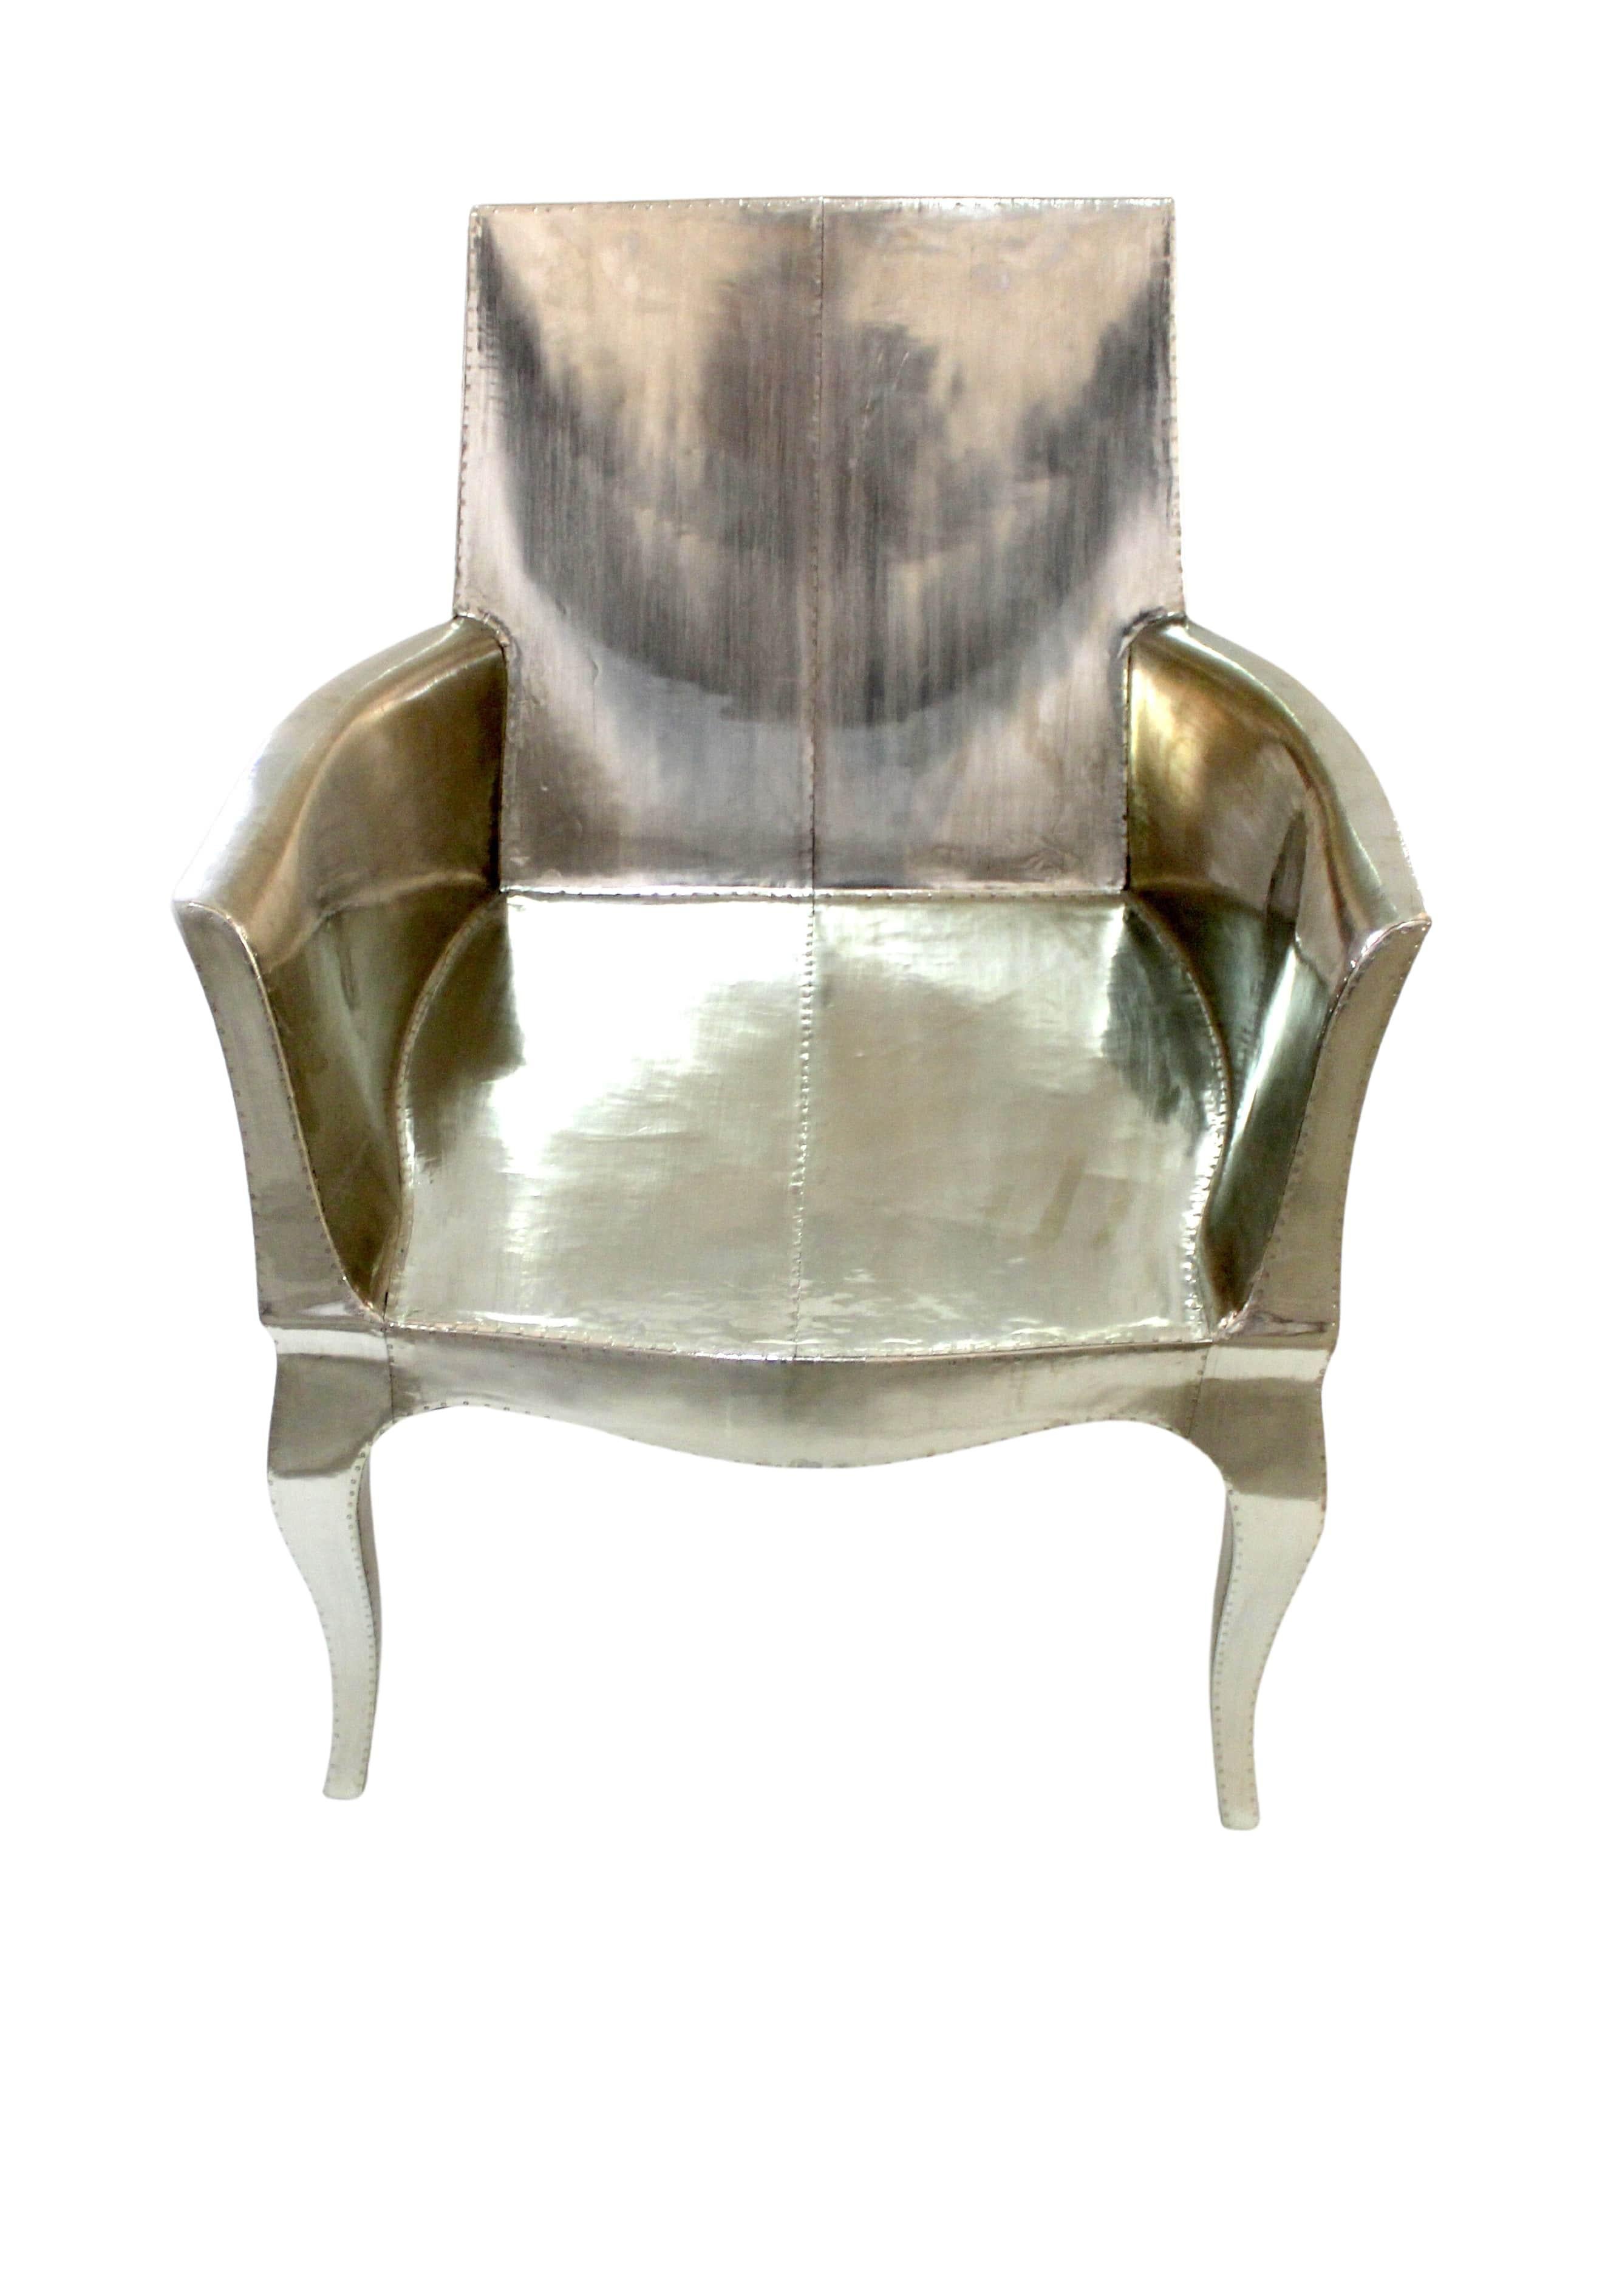 Indian Art Nouveau Chairs Pair Designed by Paul Mathieu for Stephanie Odegard For Sale